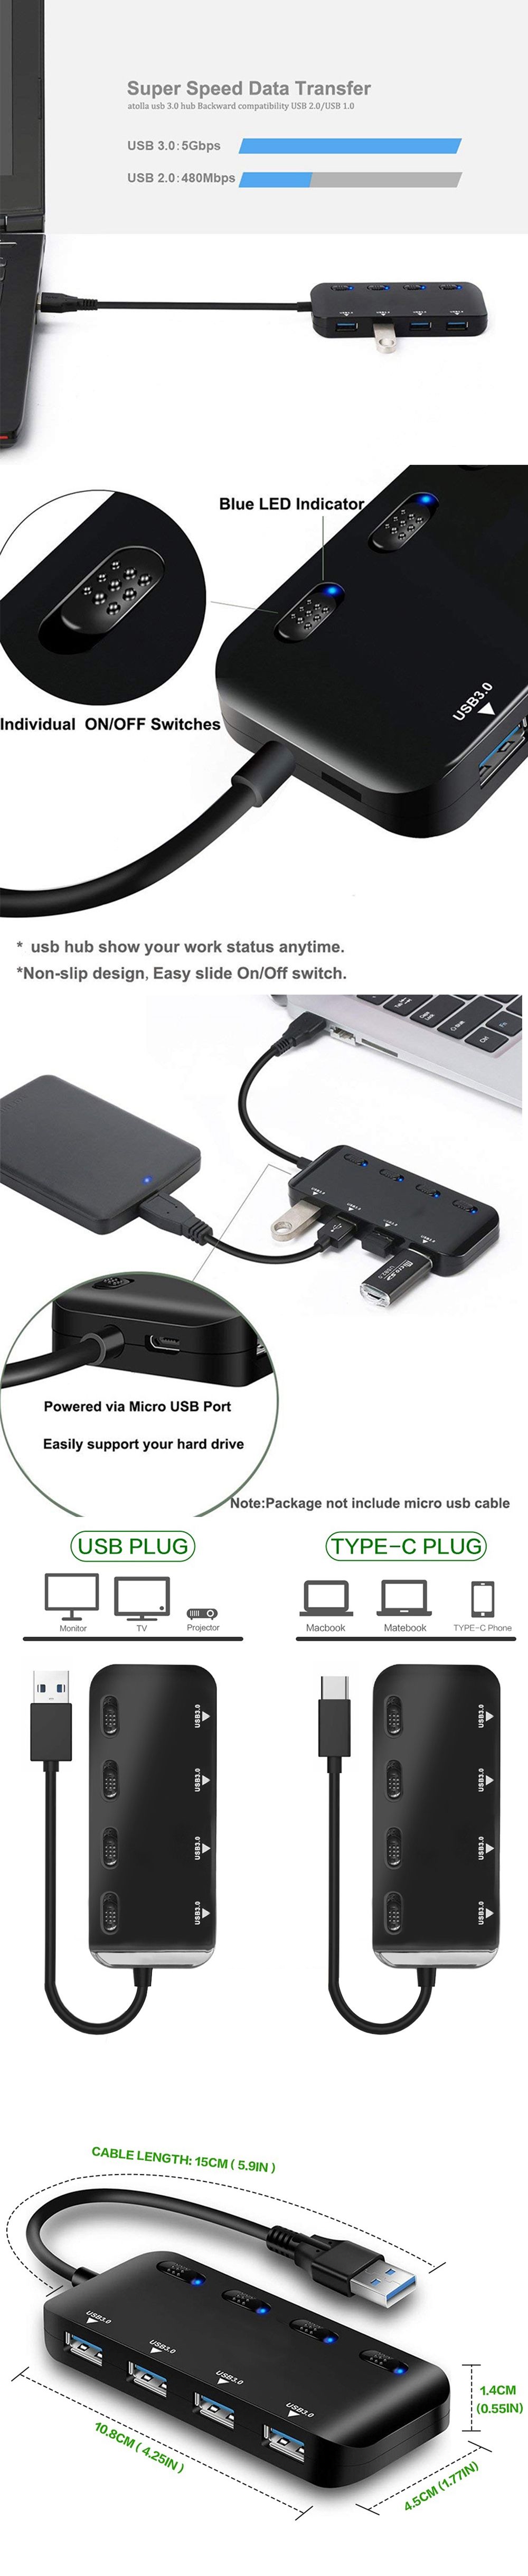 USB30--Type-C-4-in-1-Multifunction-USB-Hub-USB30-High-Speed-Transmission-with-Switch-Adapter-Extende-1598302